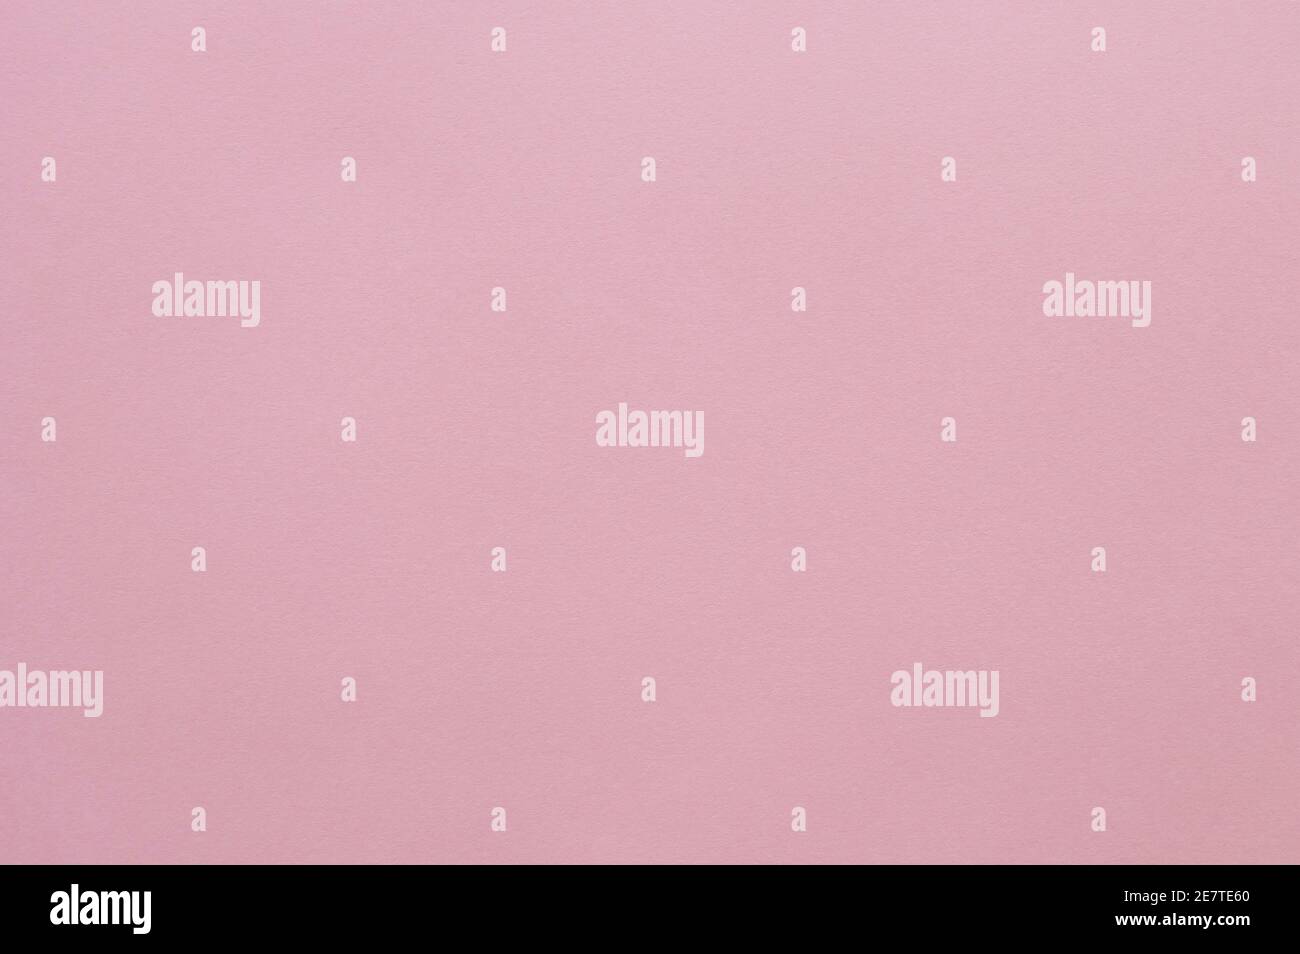 Seamless pink construction paper background wallpaper. Stock Photo